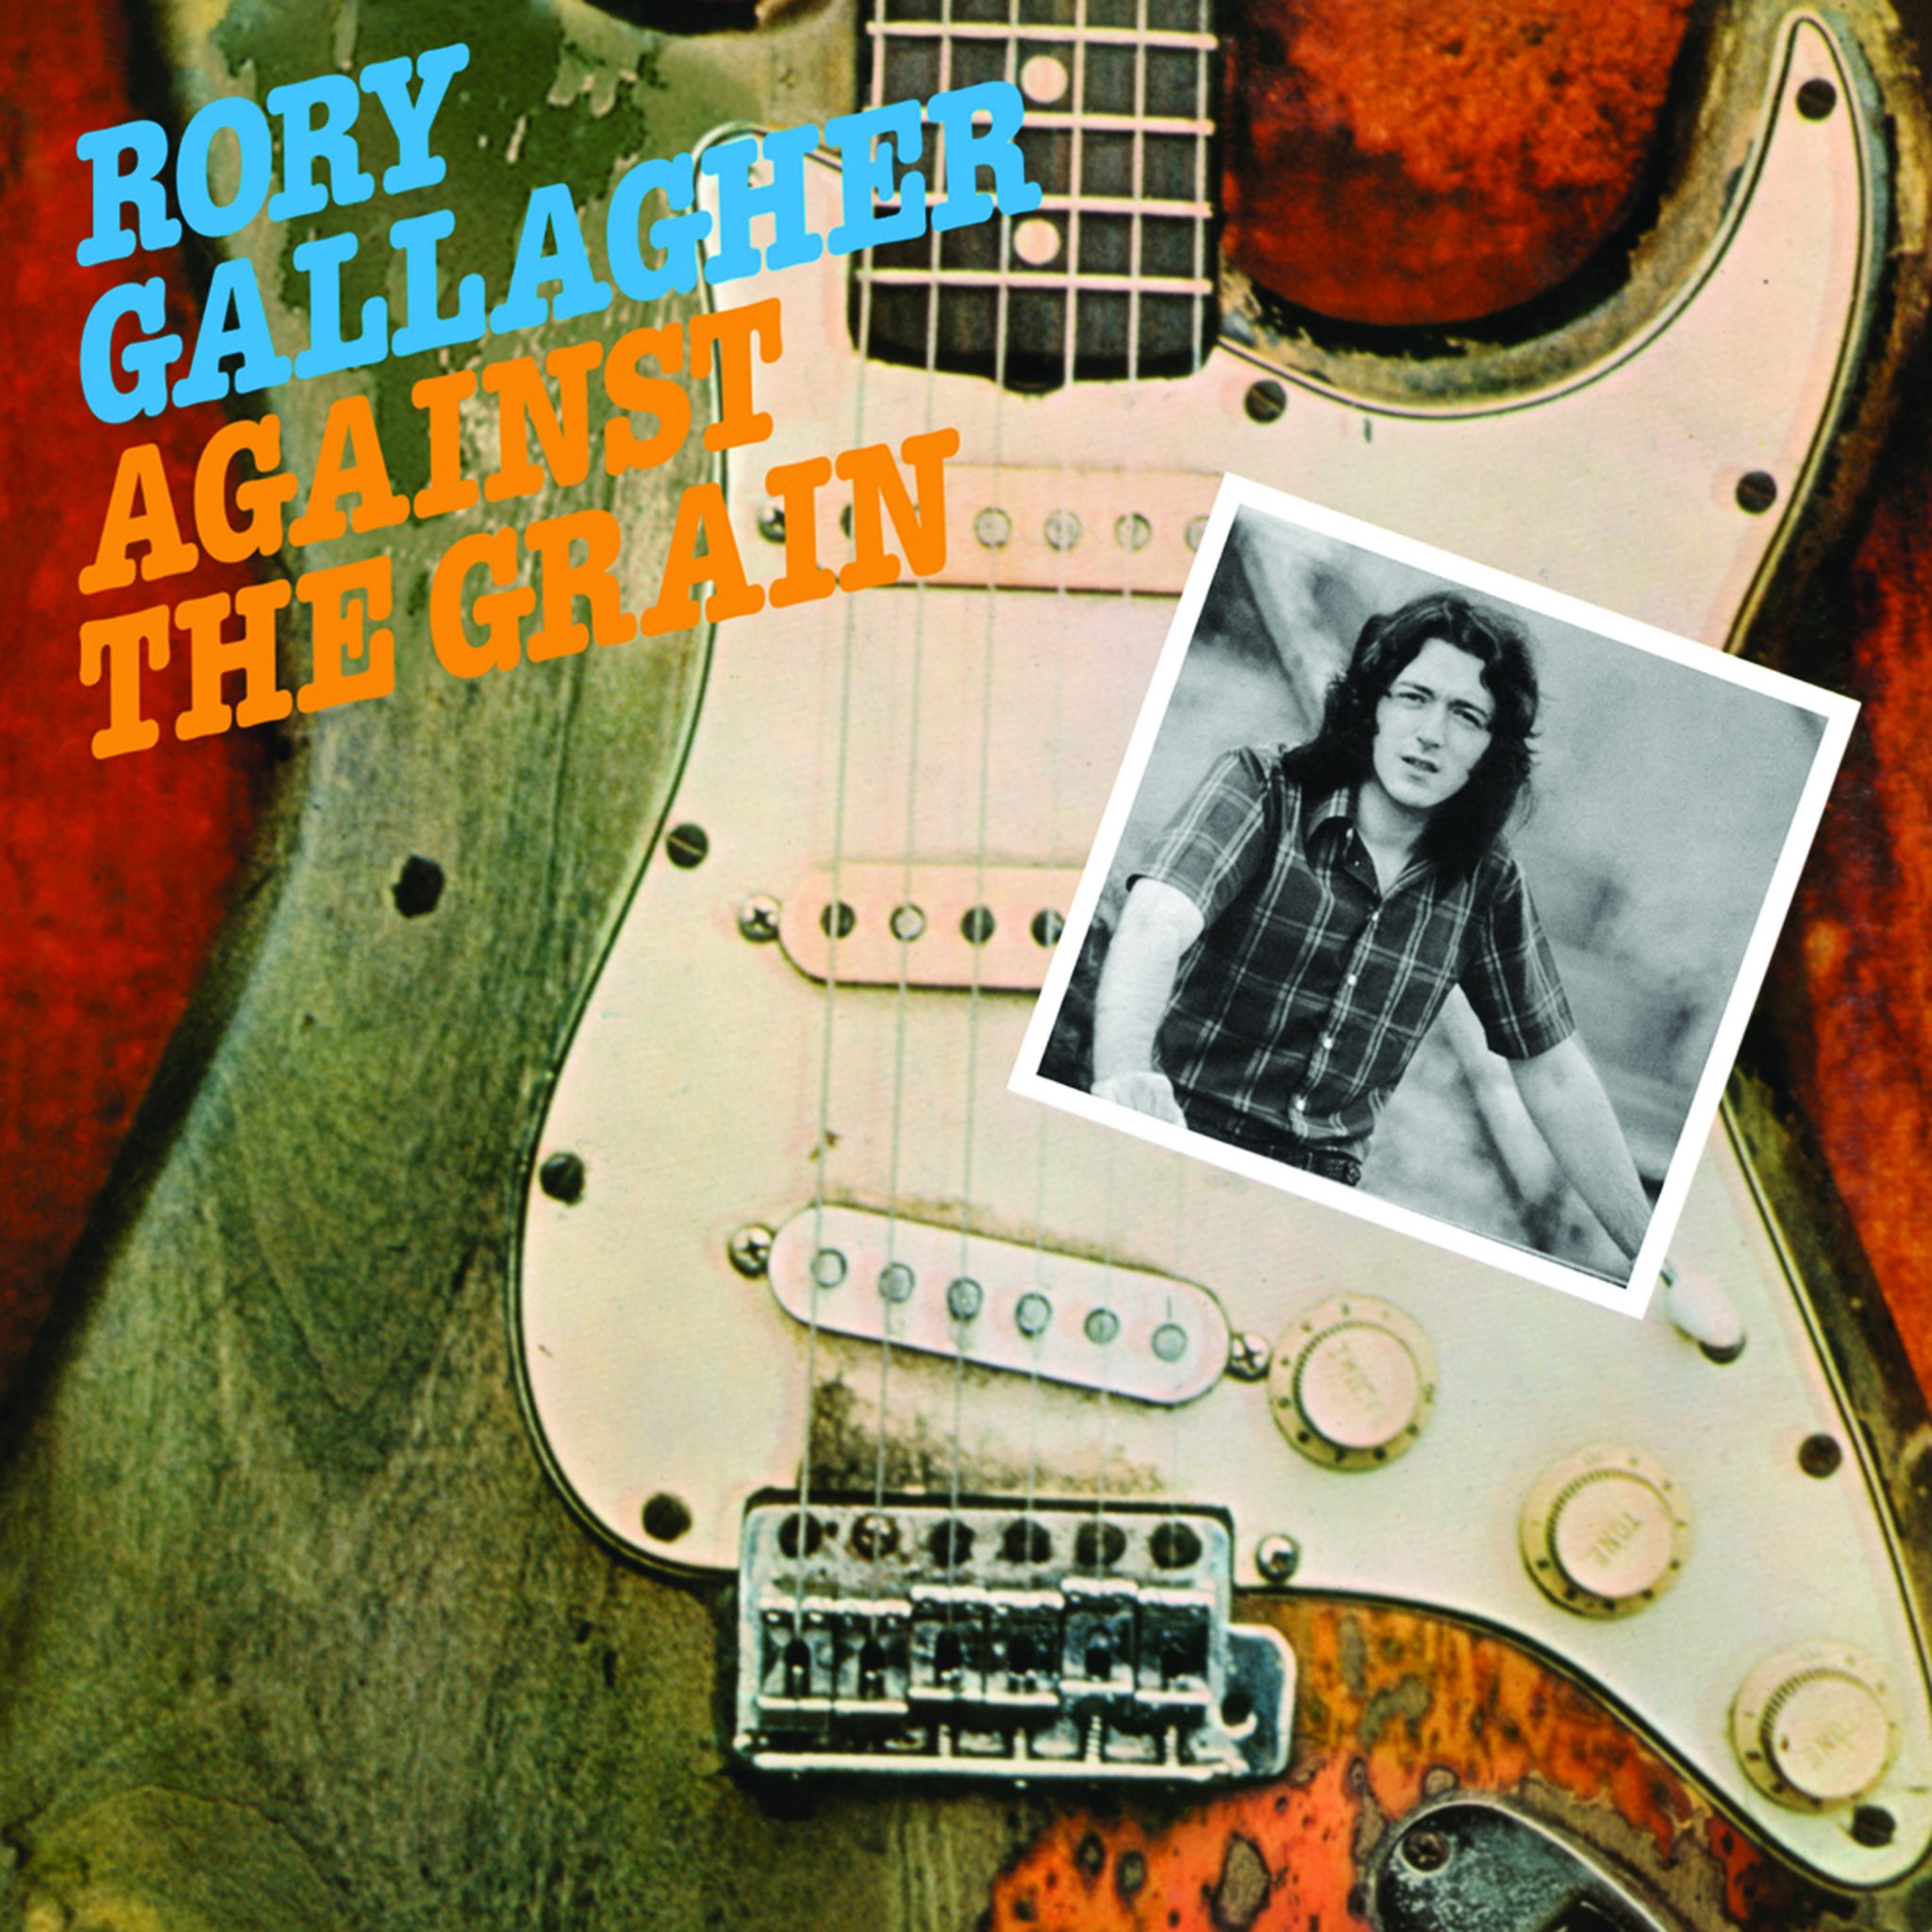 Rory Gallagher solo catalogue reissued tomorrow!